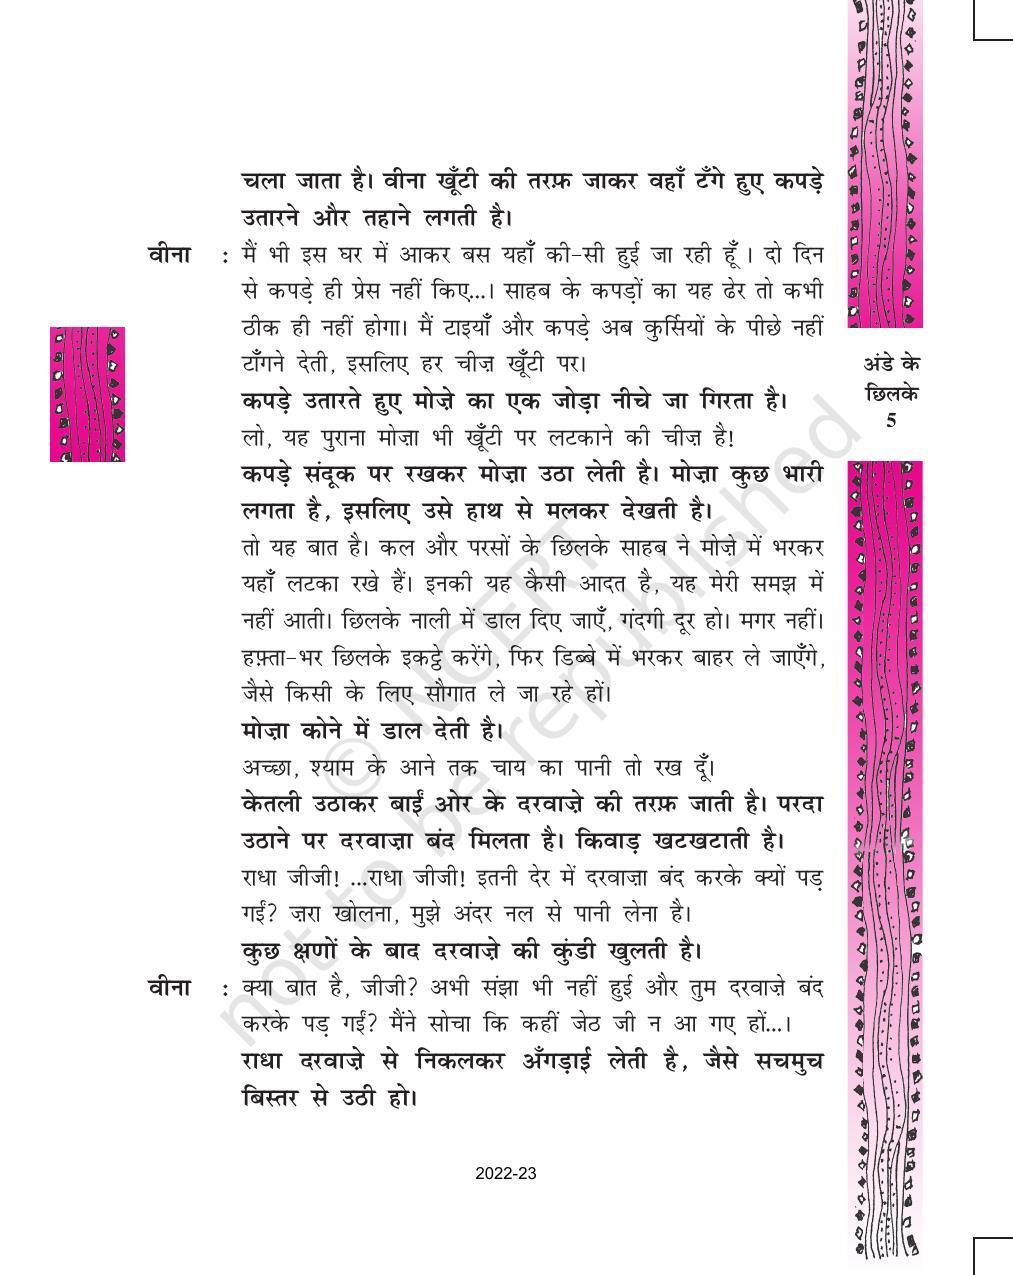 NCERT Book for Class 11 Hindi Antral Chapter 1 अंडे के छिलके - Page 5